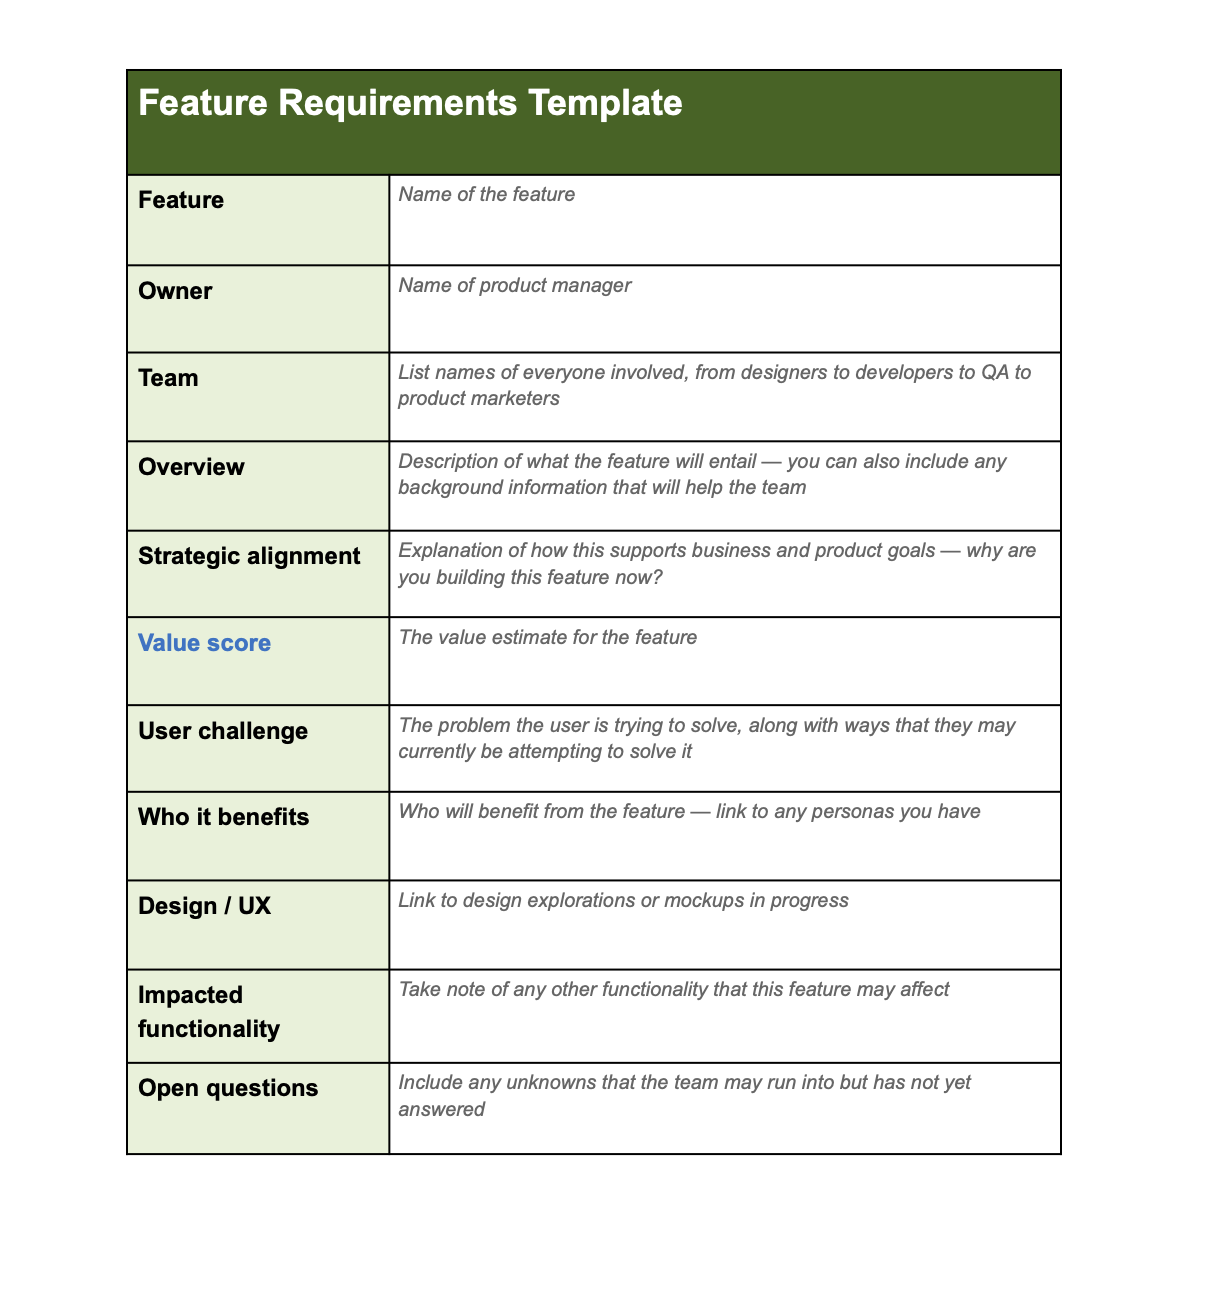 Feature requirements template